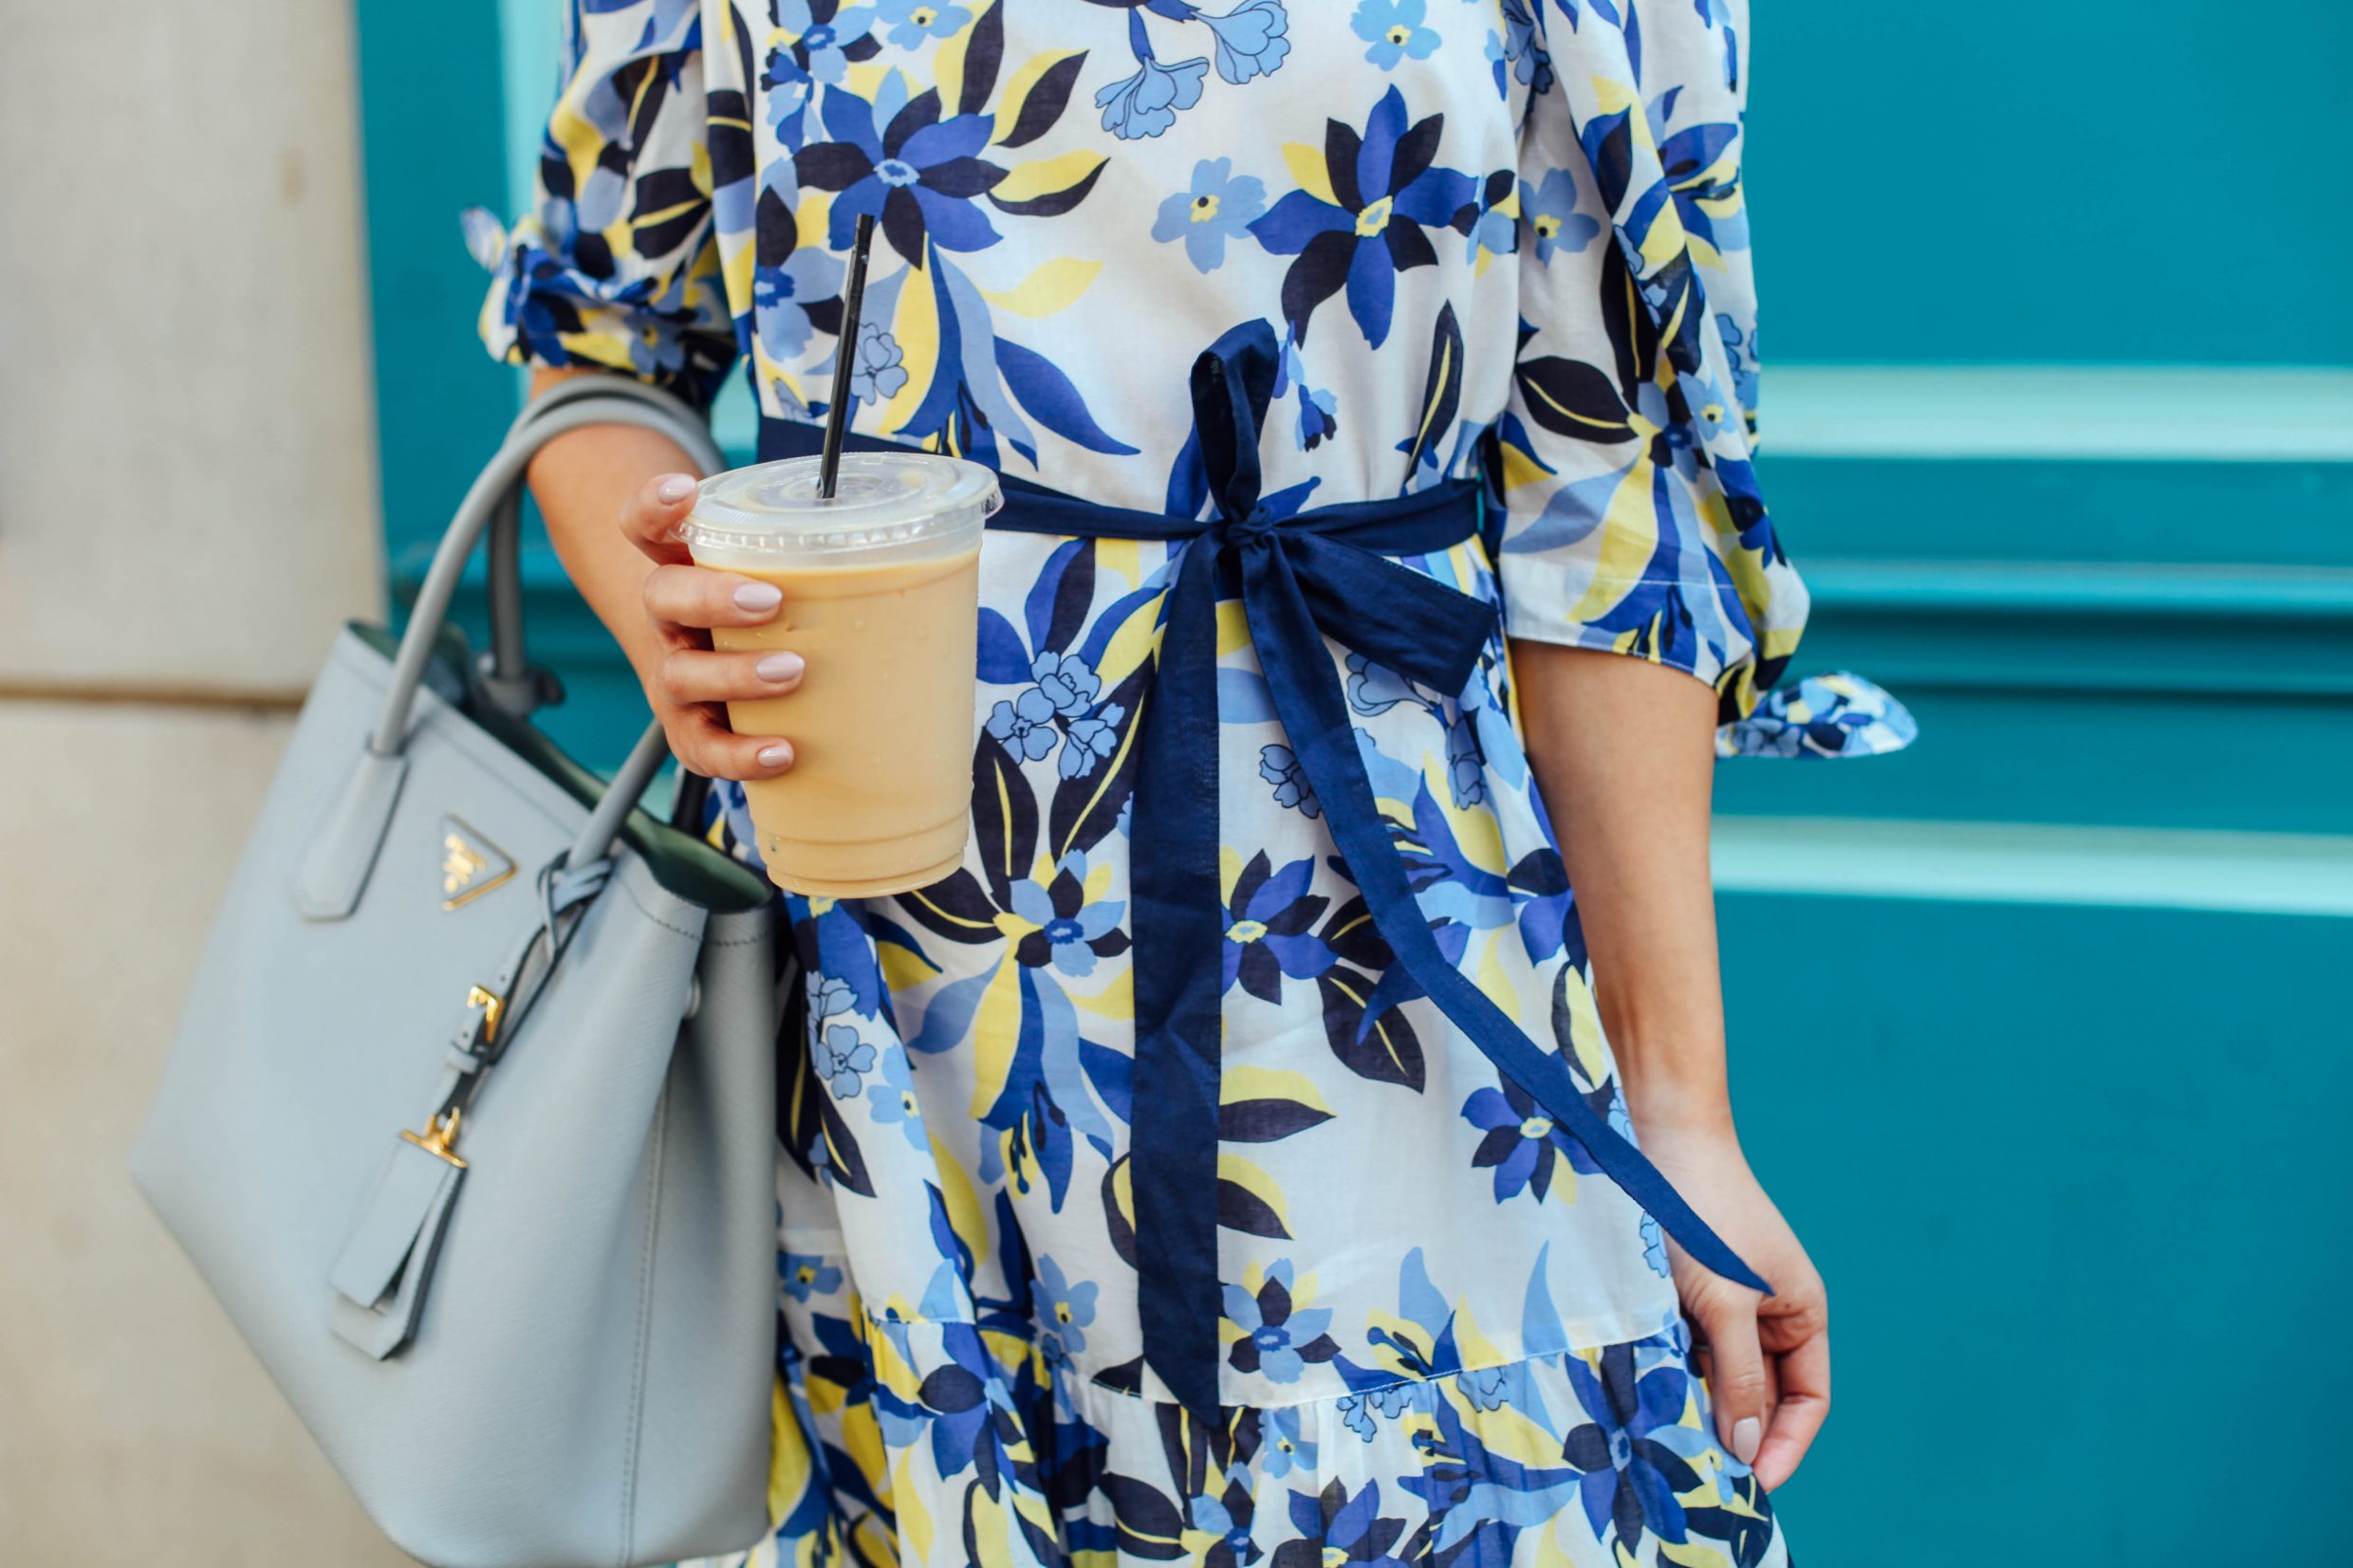 Hoang-Kim wears a blue floral off the shoulder dress, the epitome of southern charm